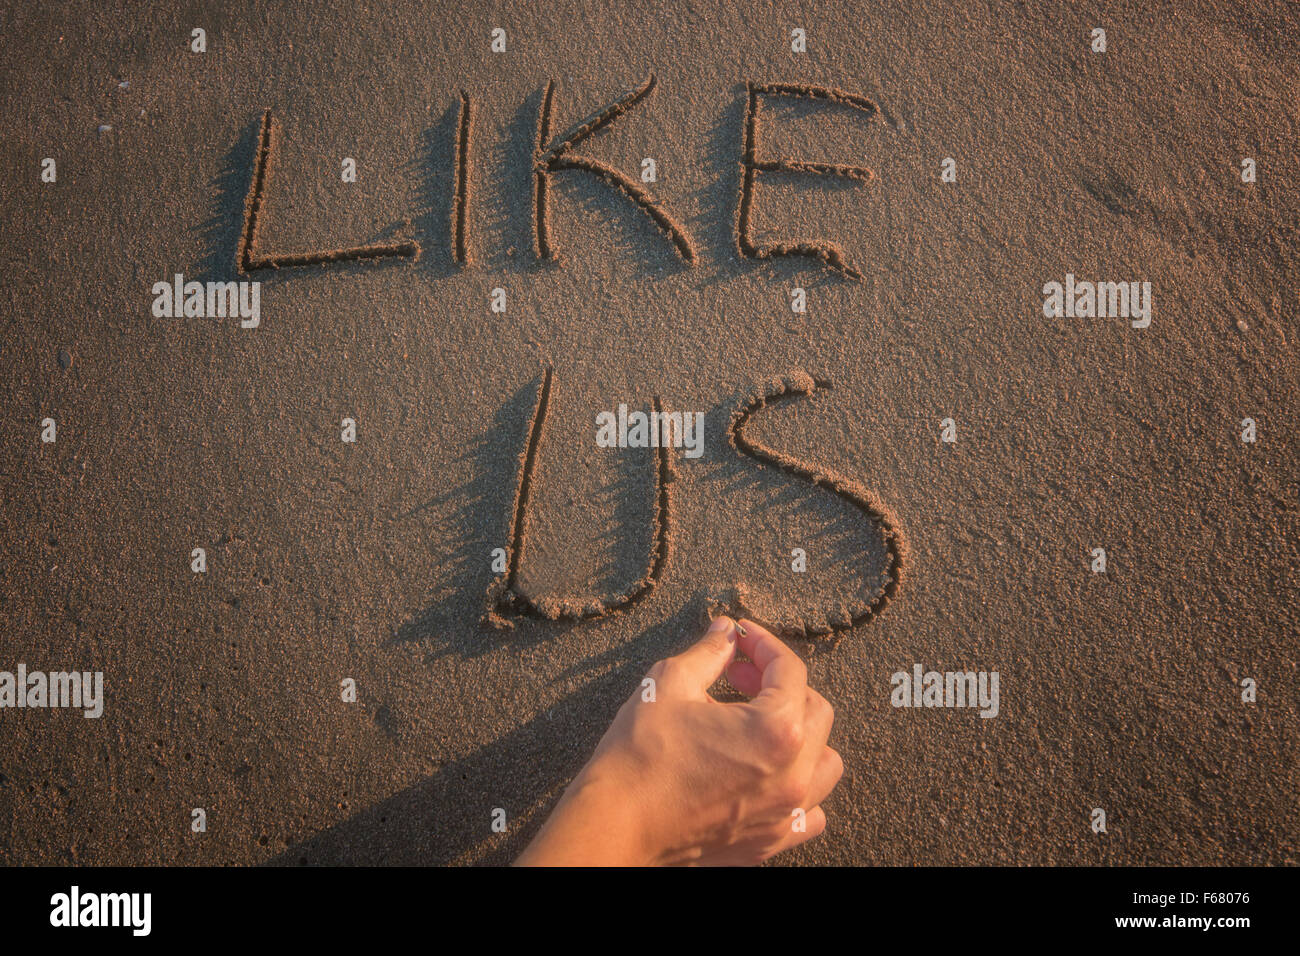 Like - text written by hand in sand on a beach, Stock Photo